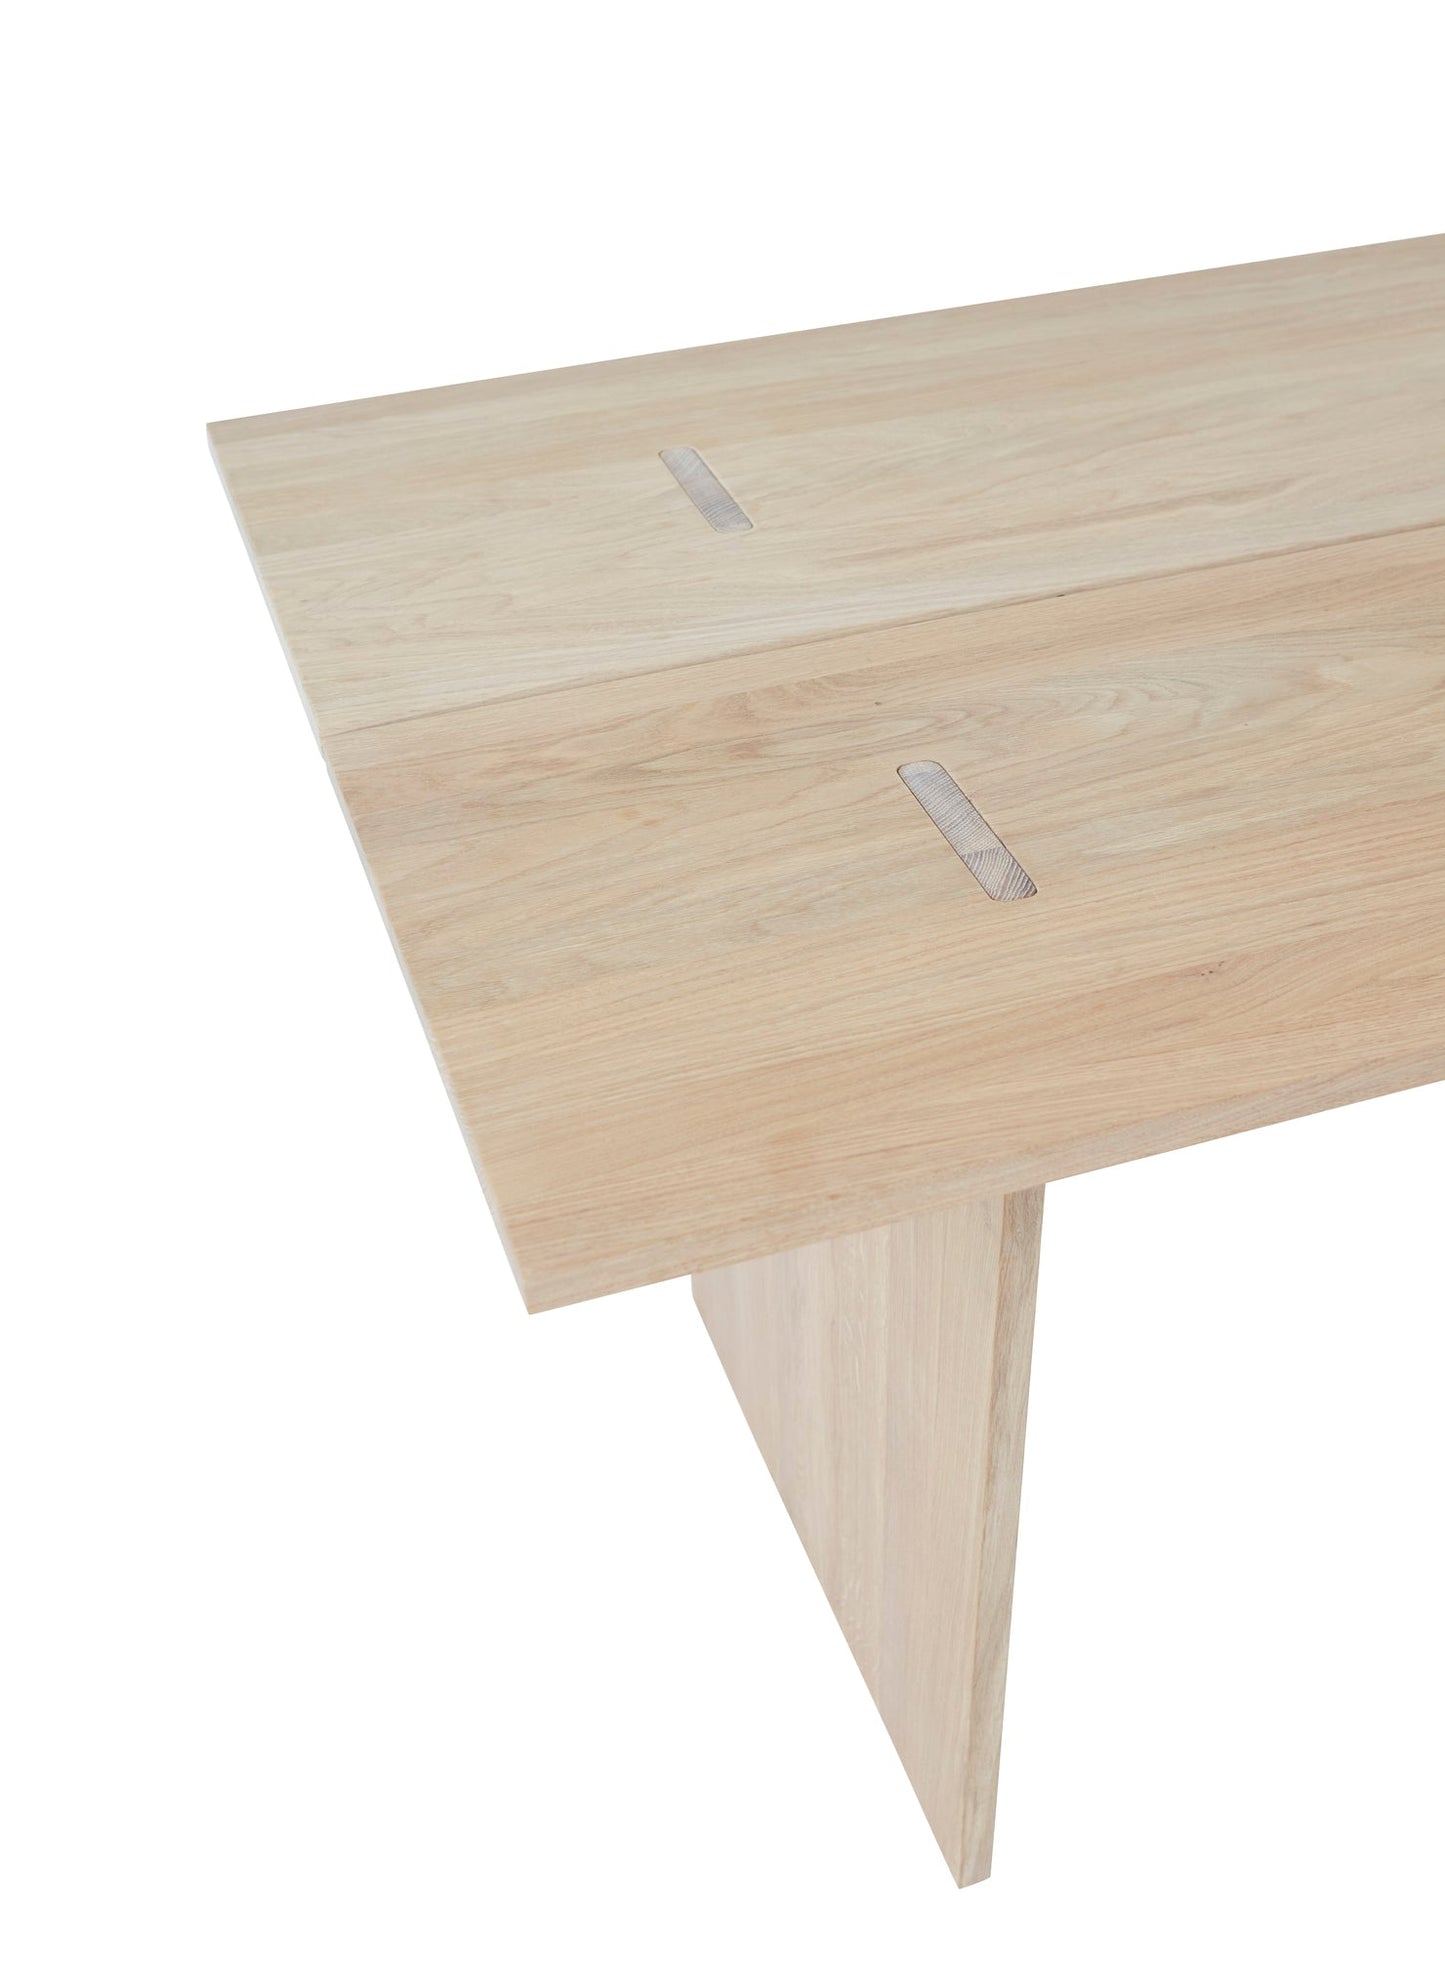 Load image into Gallery viewer, Kotai Dining Table - Large
